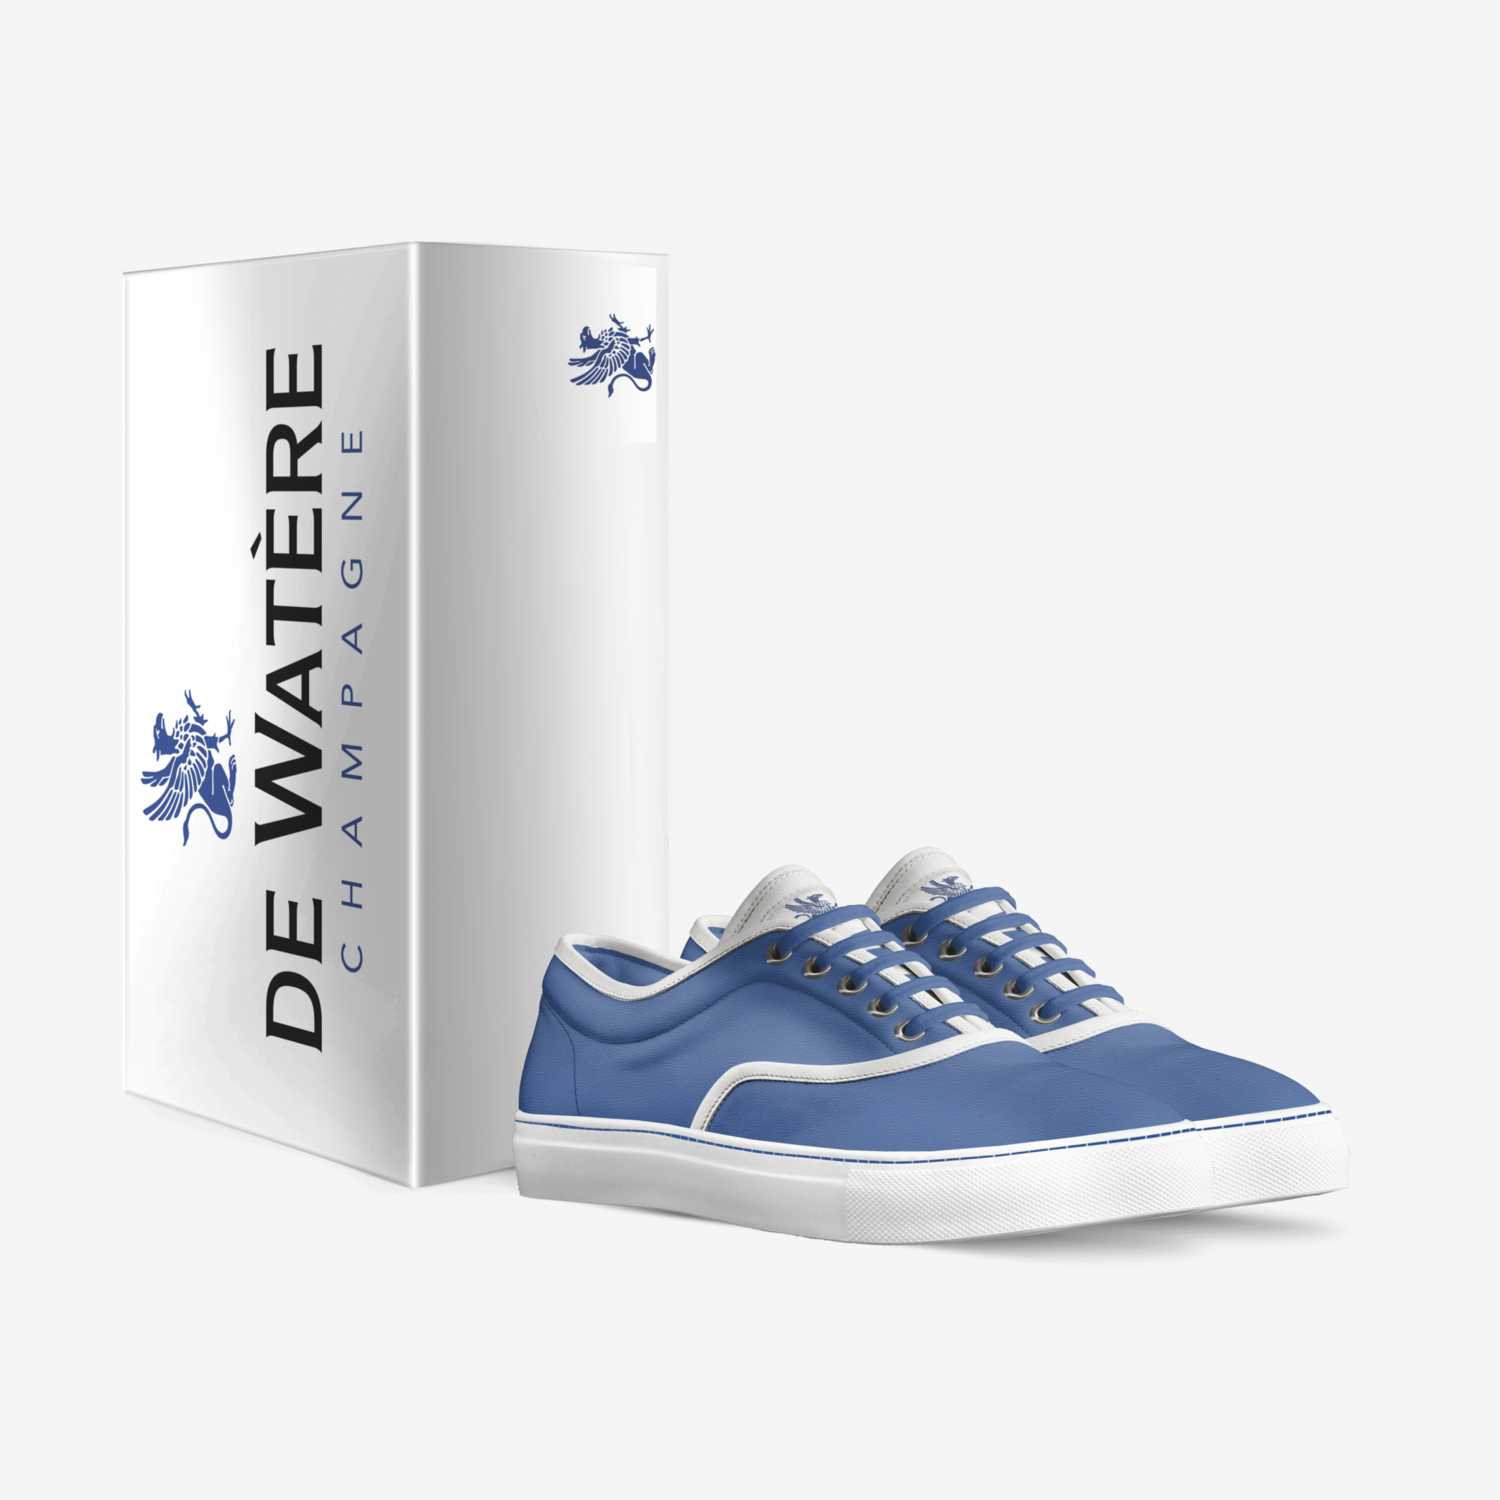 1 custom made in Italy shoes by De Watère | Box view